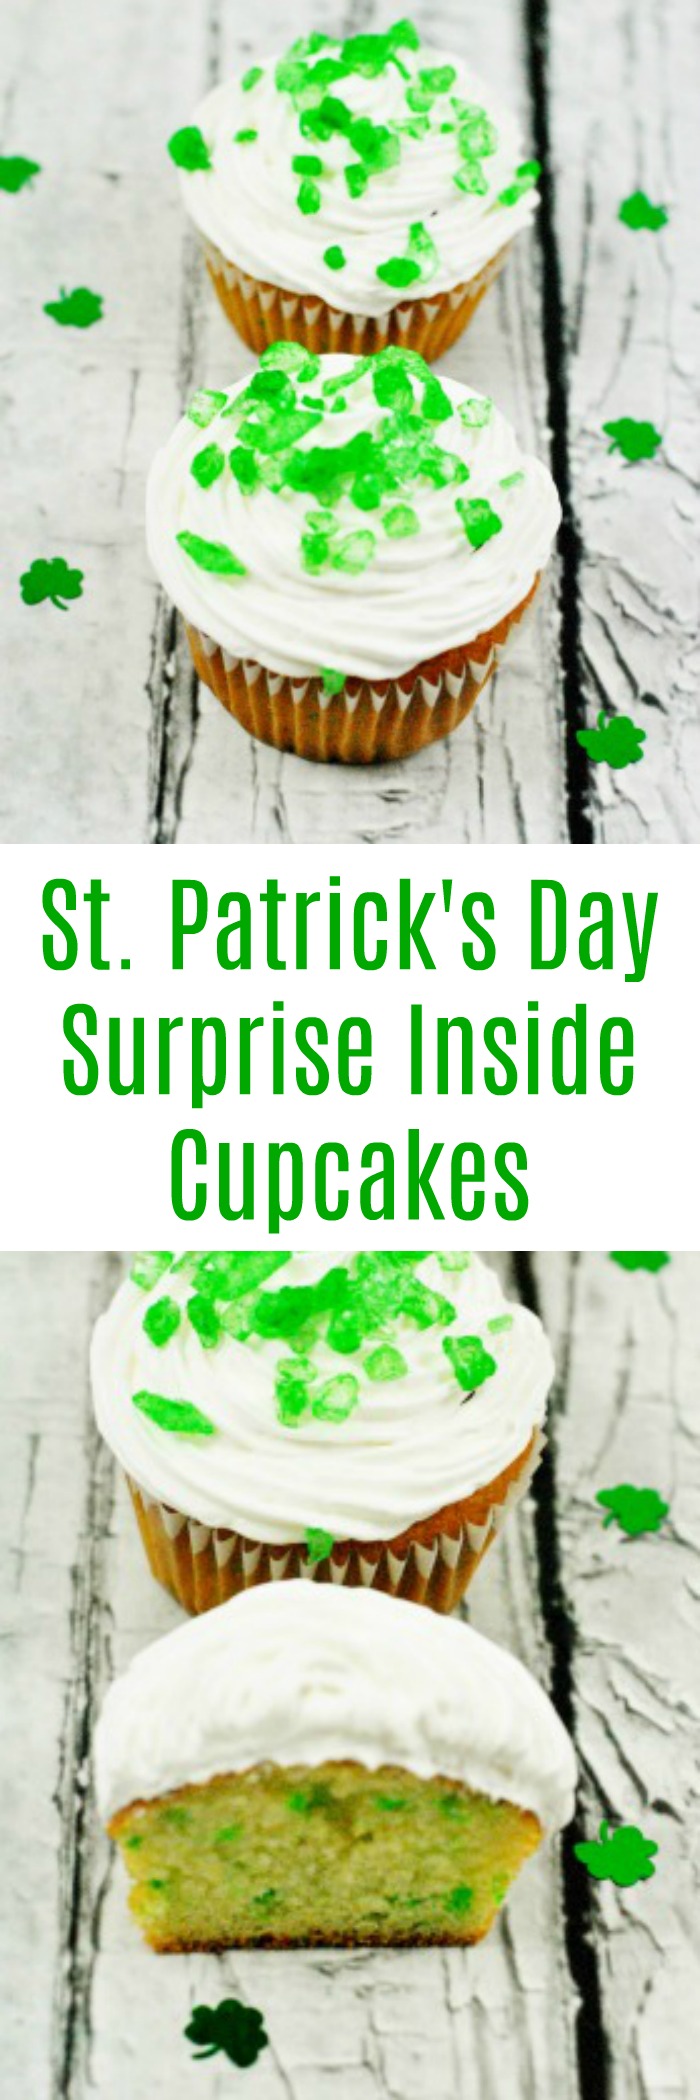 st. patrick's day green cupcakes